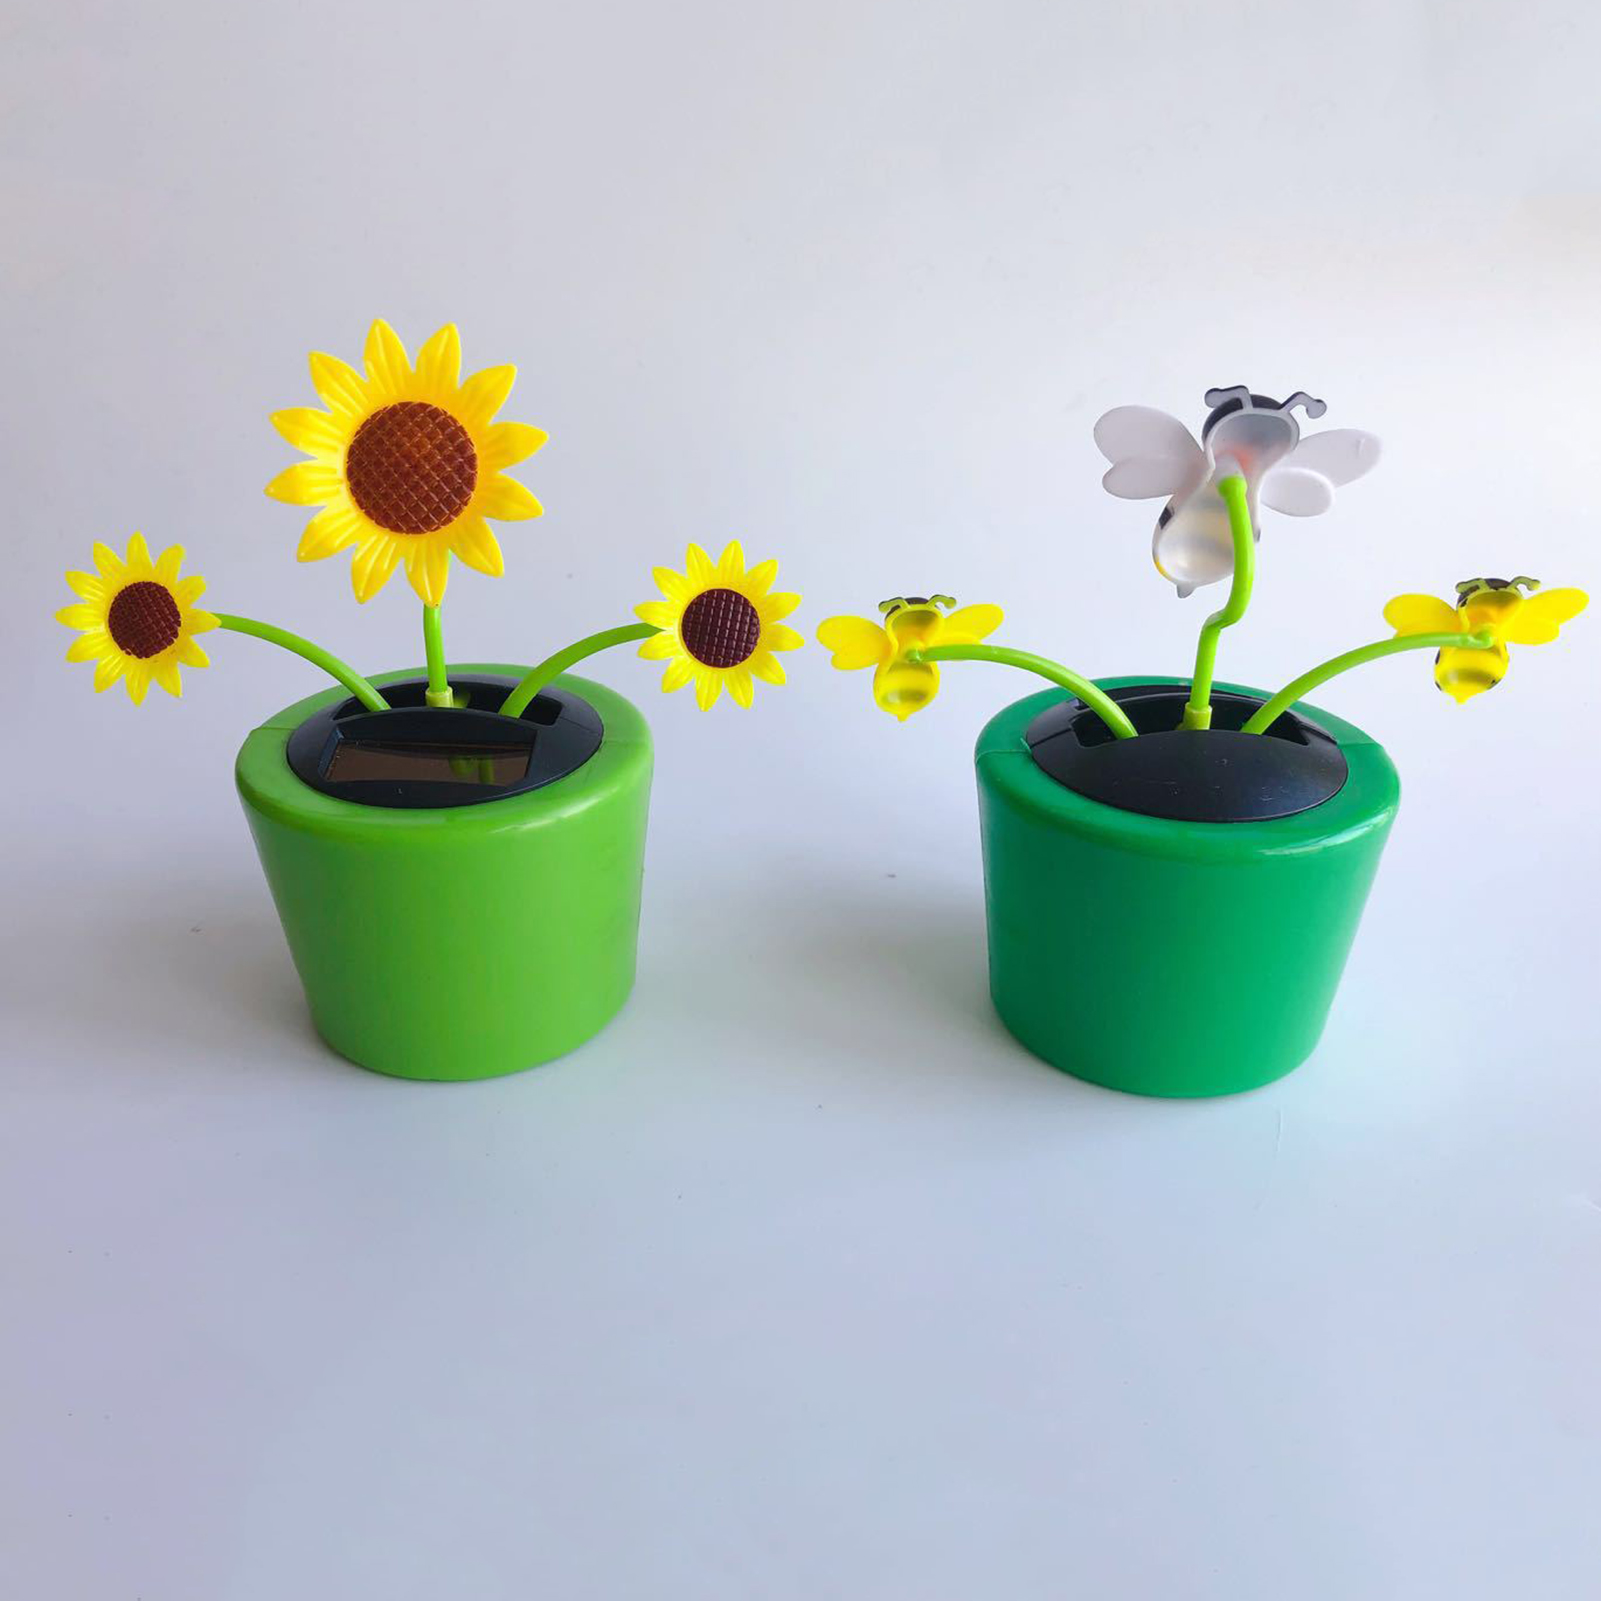 Cute Solar Power Flip Flap Flower Insect for Car Decoration Swing Dancing Flower Eco-Friendly Bobblehead Solar Dancing Flowers in Colorful Pots - image 3 of 8